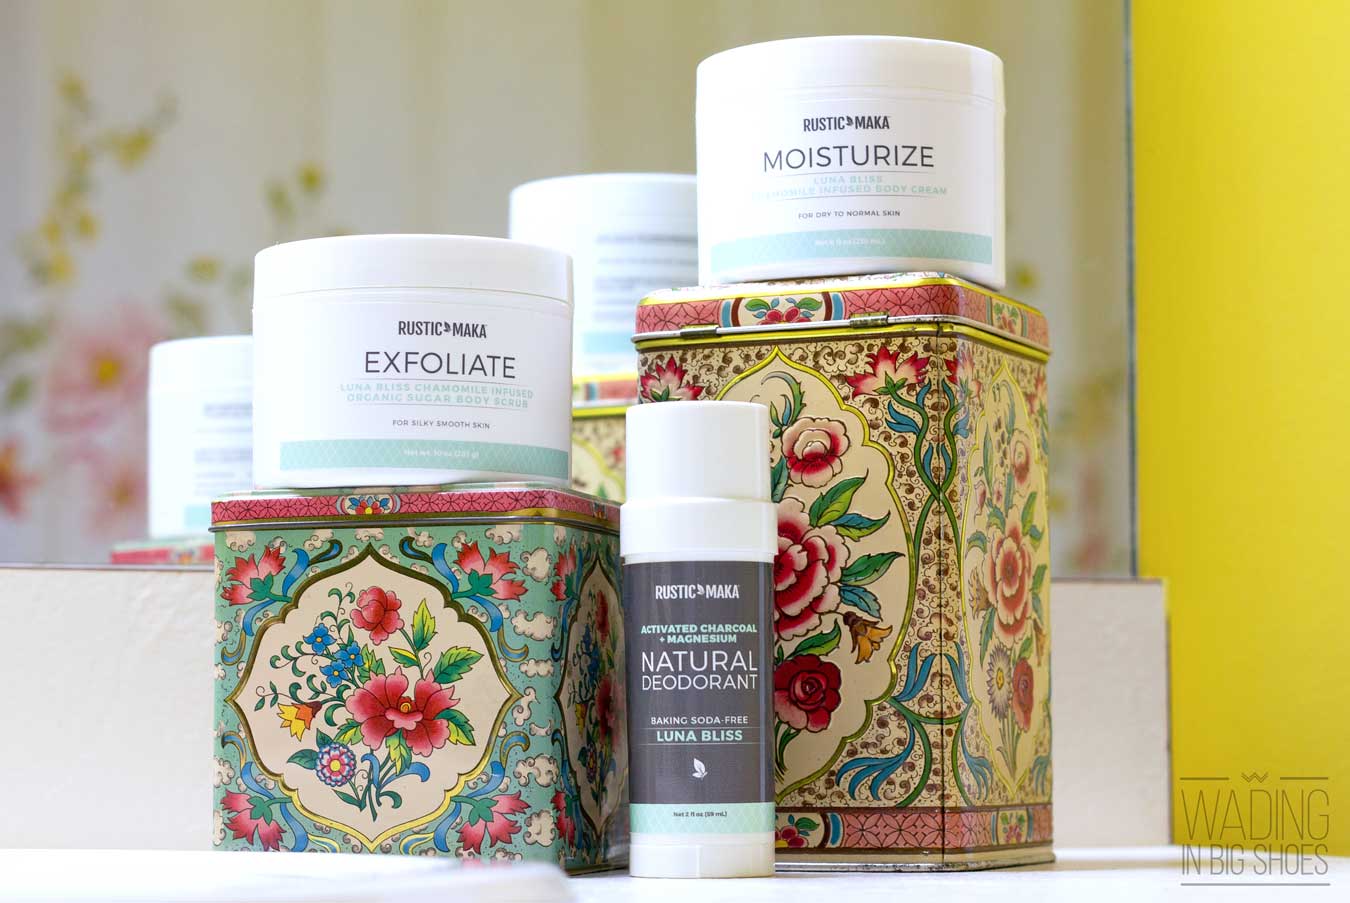 This Michigan Skin Care Line Makes Winter Skin Feel (And Smell) Like Springtime | via Wading in Big Shoes